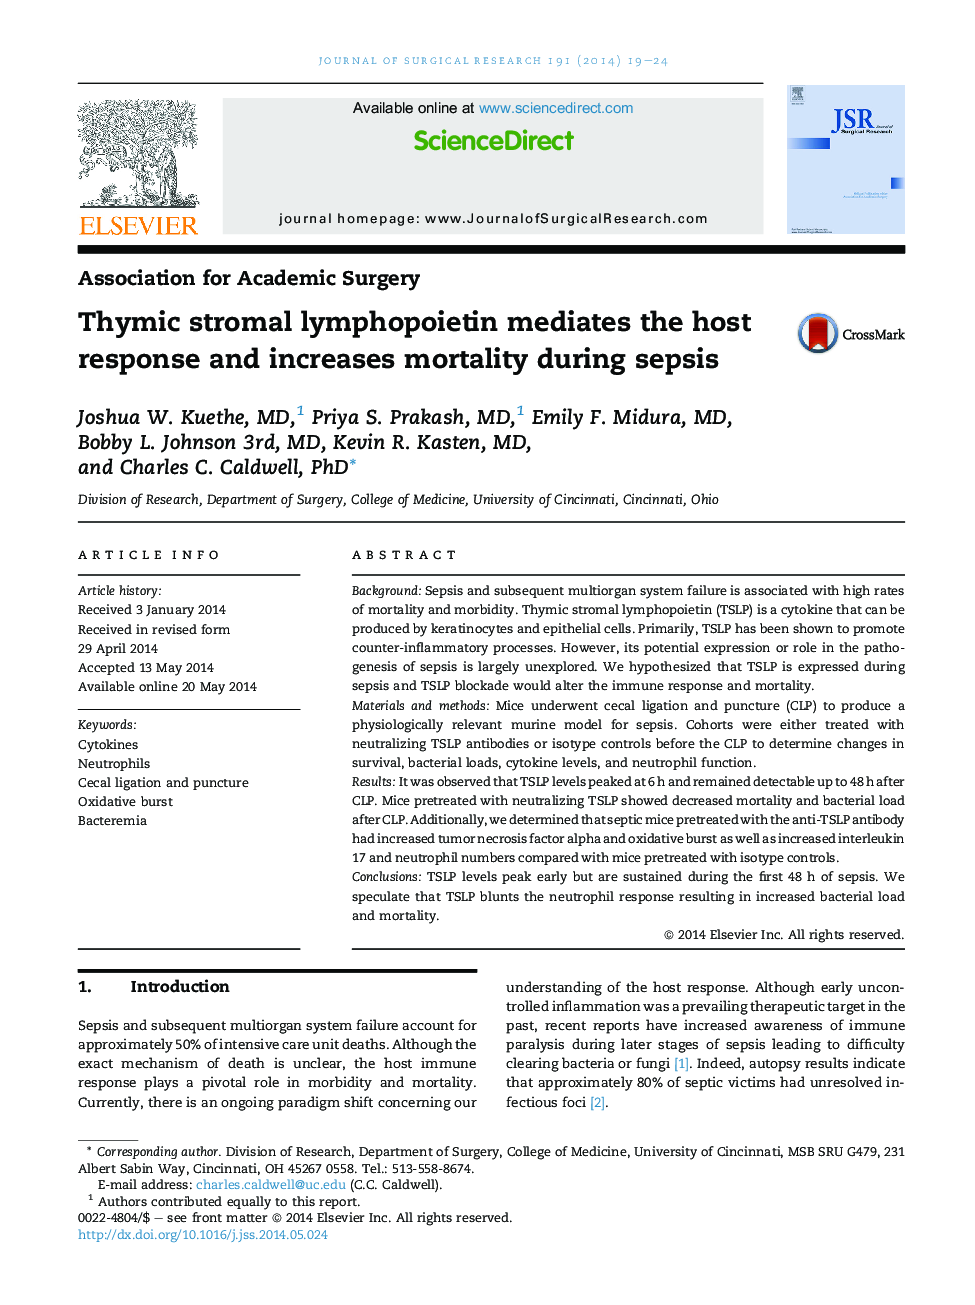 Association for Academic SurgeryThymic stromal lymphopoietin mediates the host response and increases mortality during sepsis